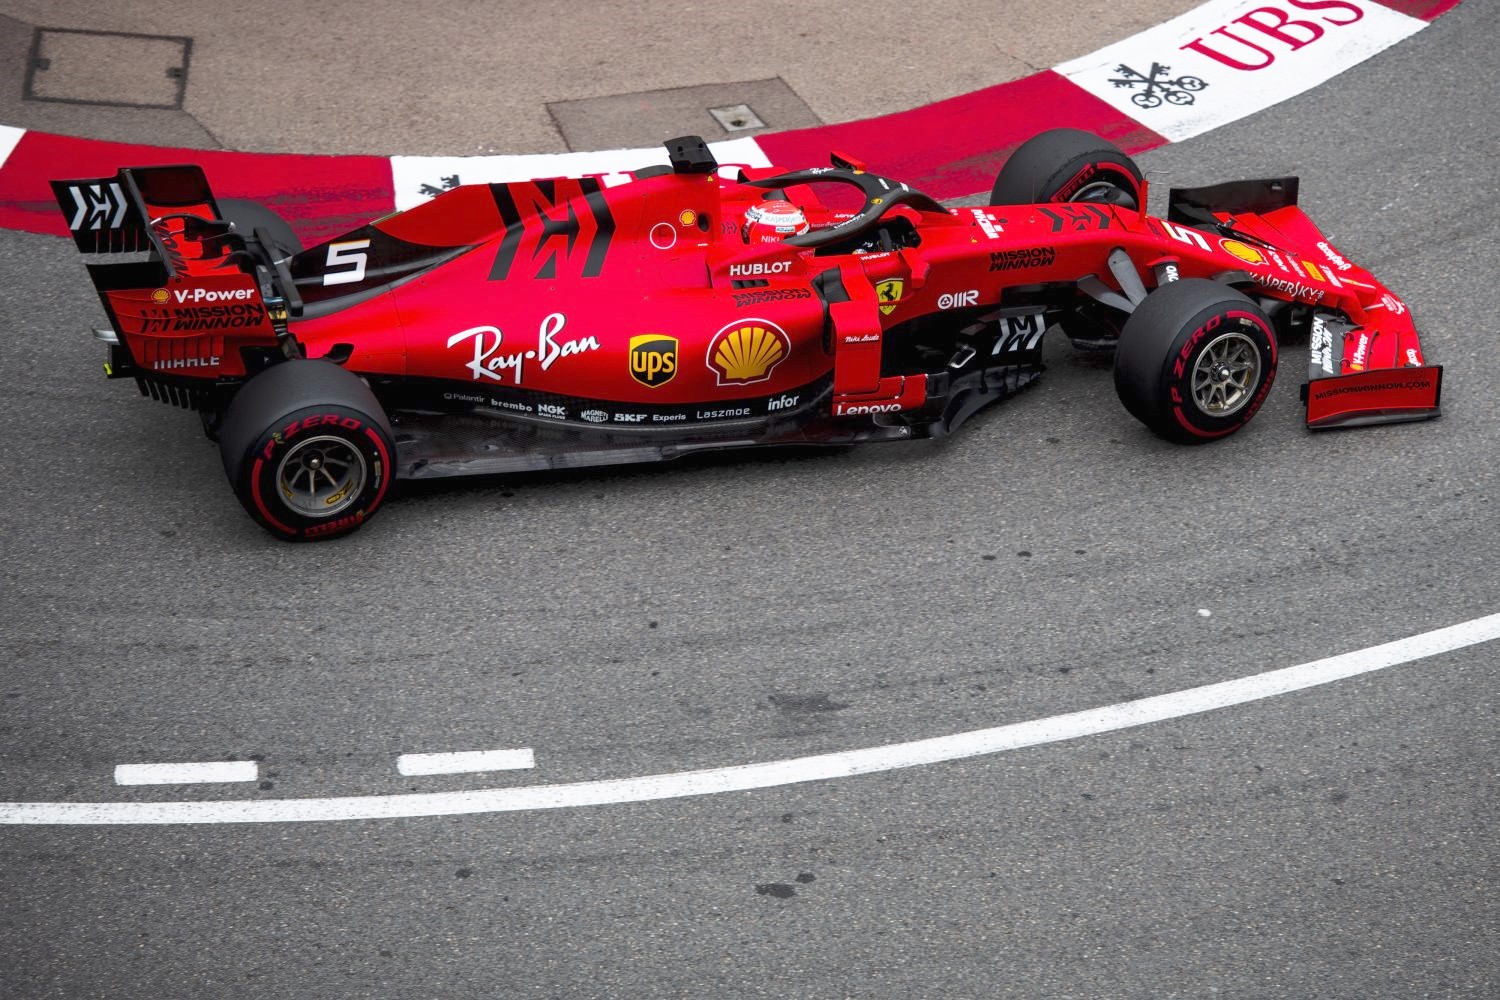 Ferrari's inferior car means they have to take risks to try and win